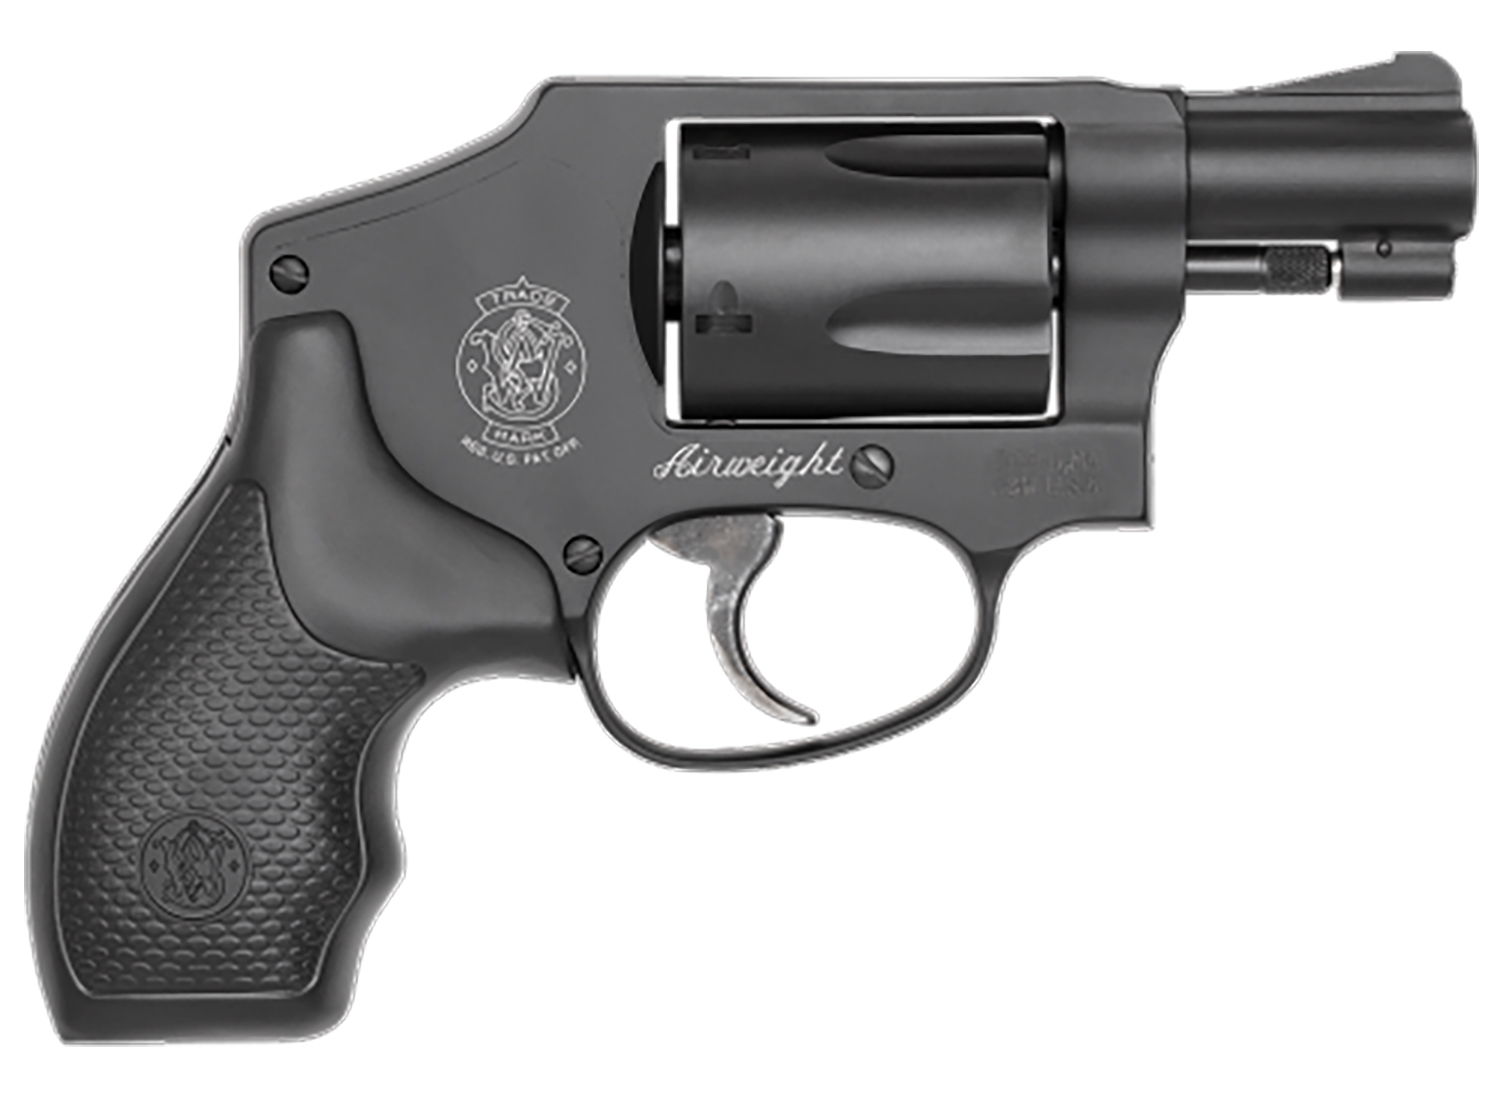 Smith & Wesson 162810 Model 442 Airweight 38 S&W Spl +P 5 Shot 1.88